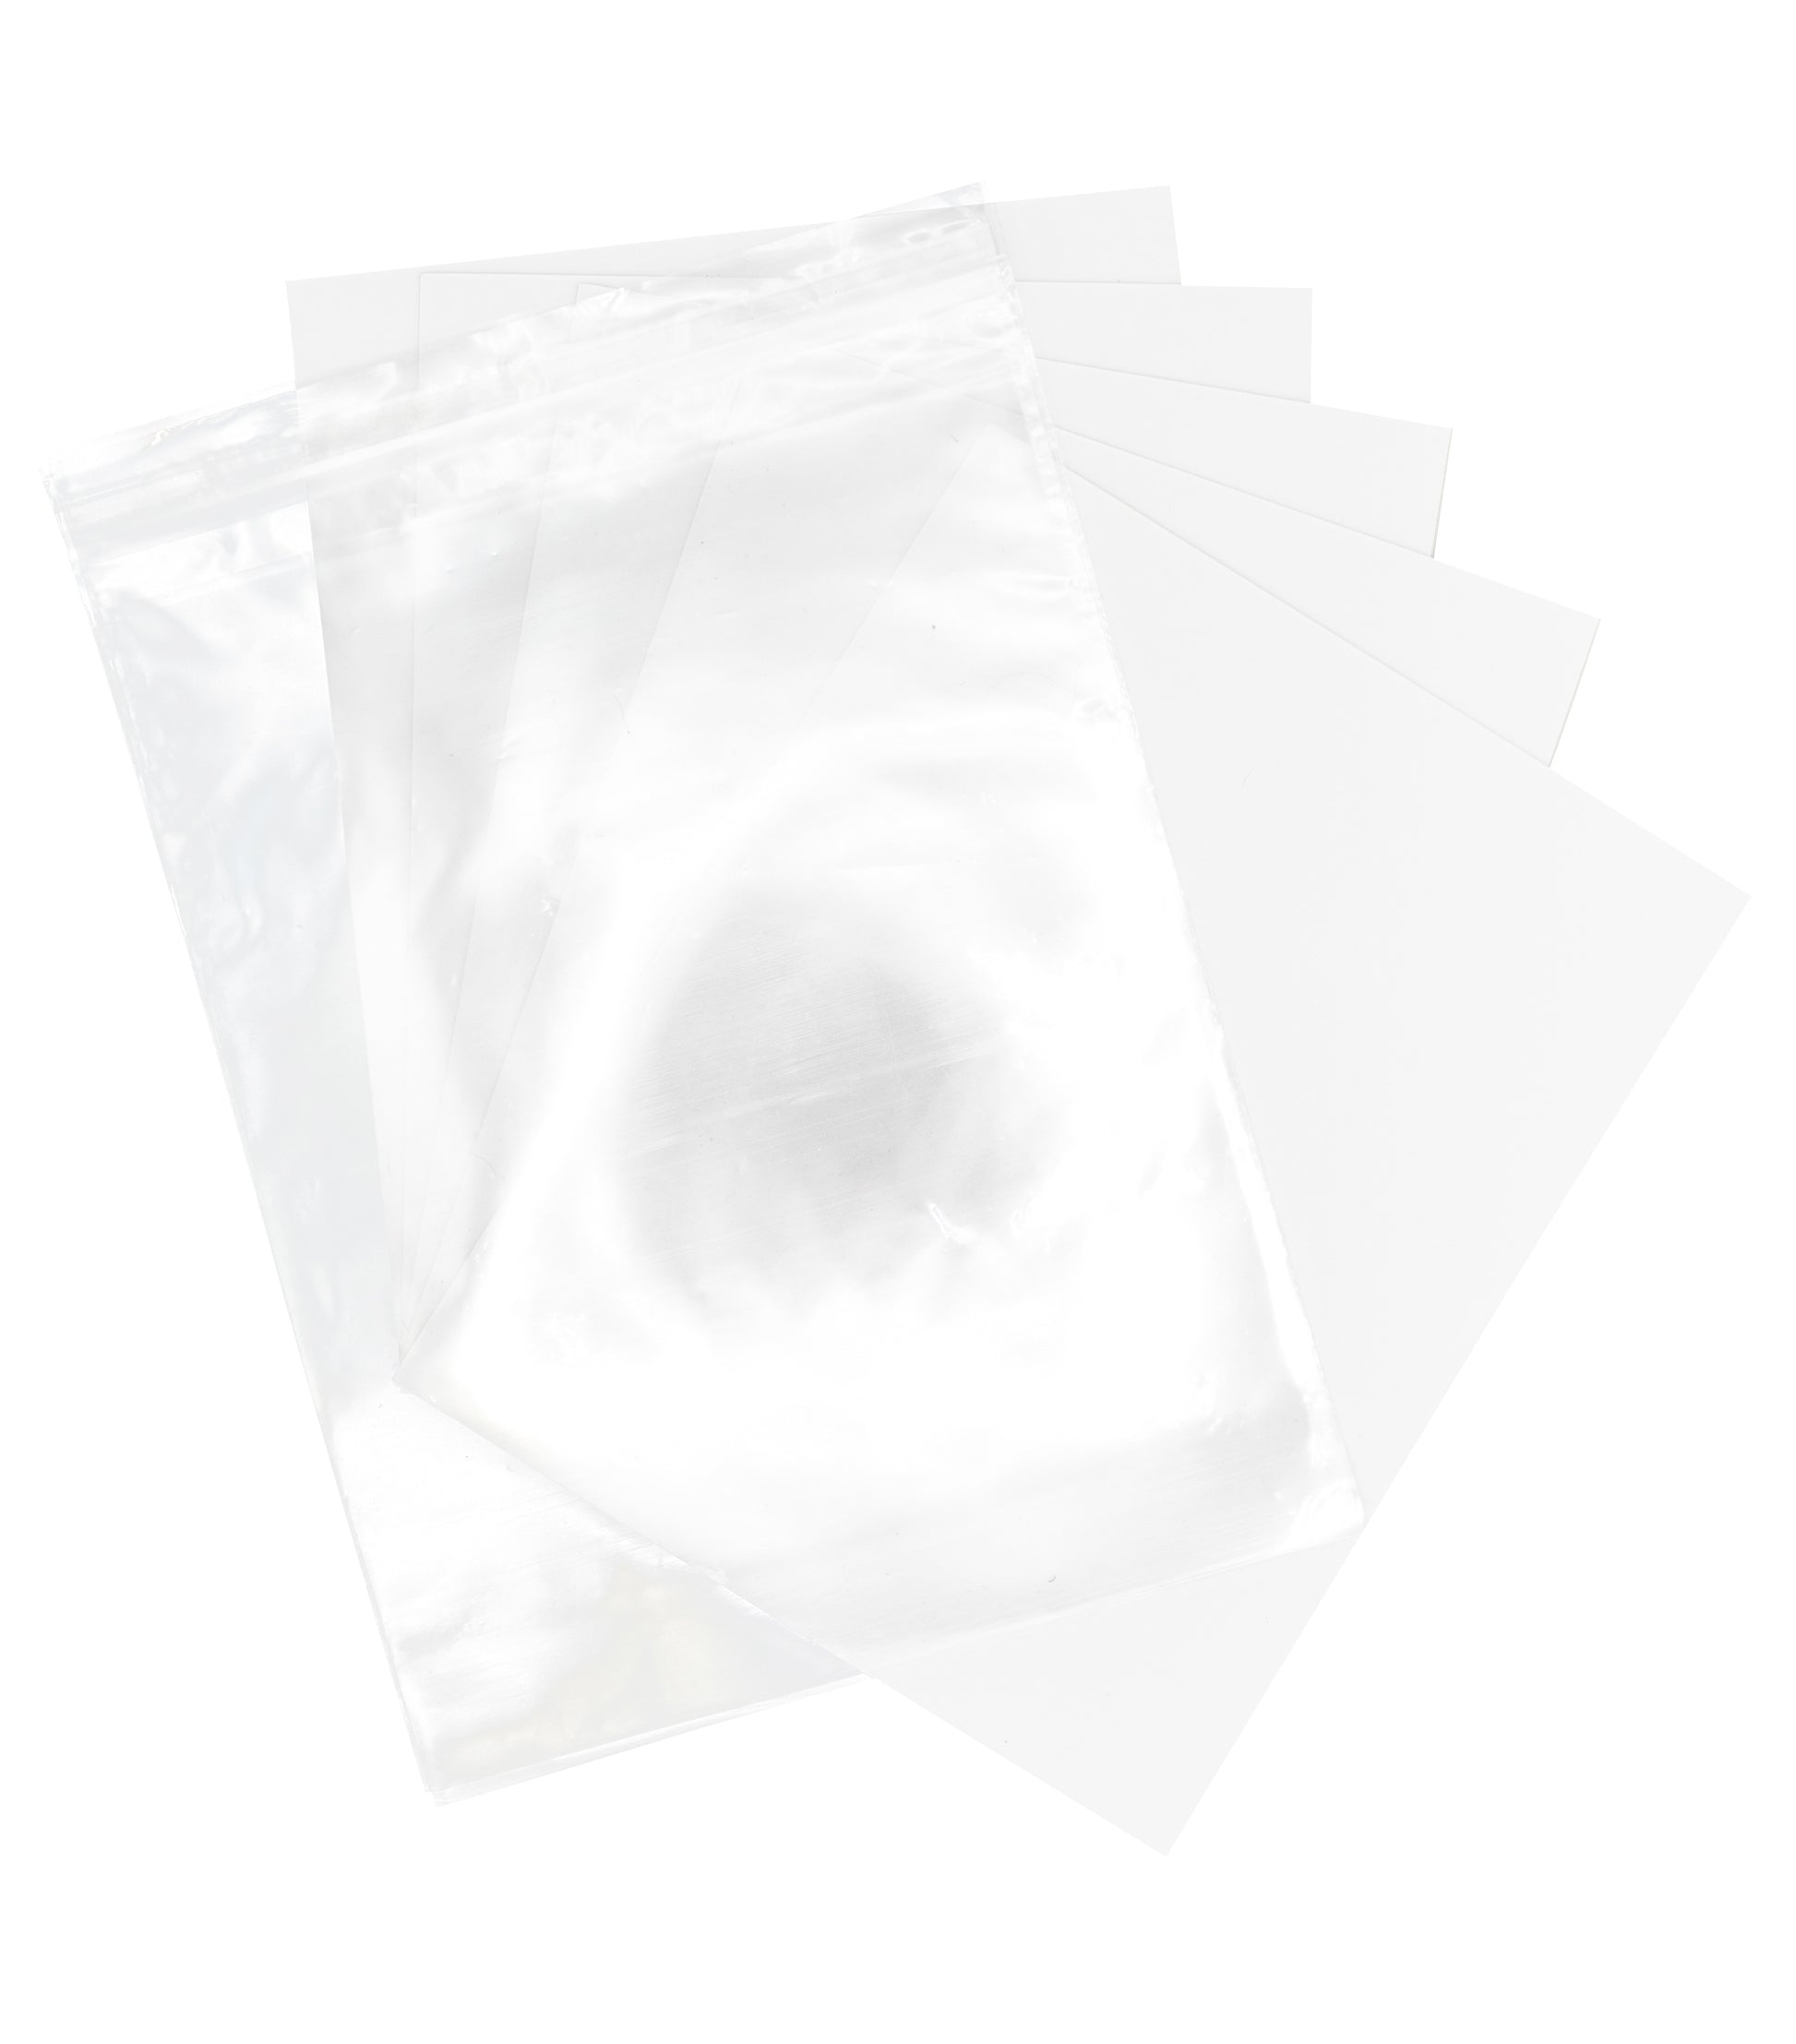 13x19 Mat for 18x24 Frame - Precut Mat Board Acid-Free Show Kit with Backing Board, and Clear Bags Textured White 13x19 Photo Matte for A 18x24